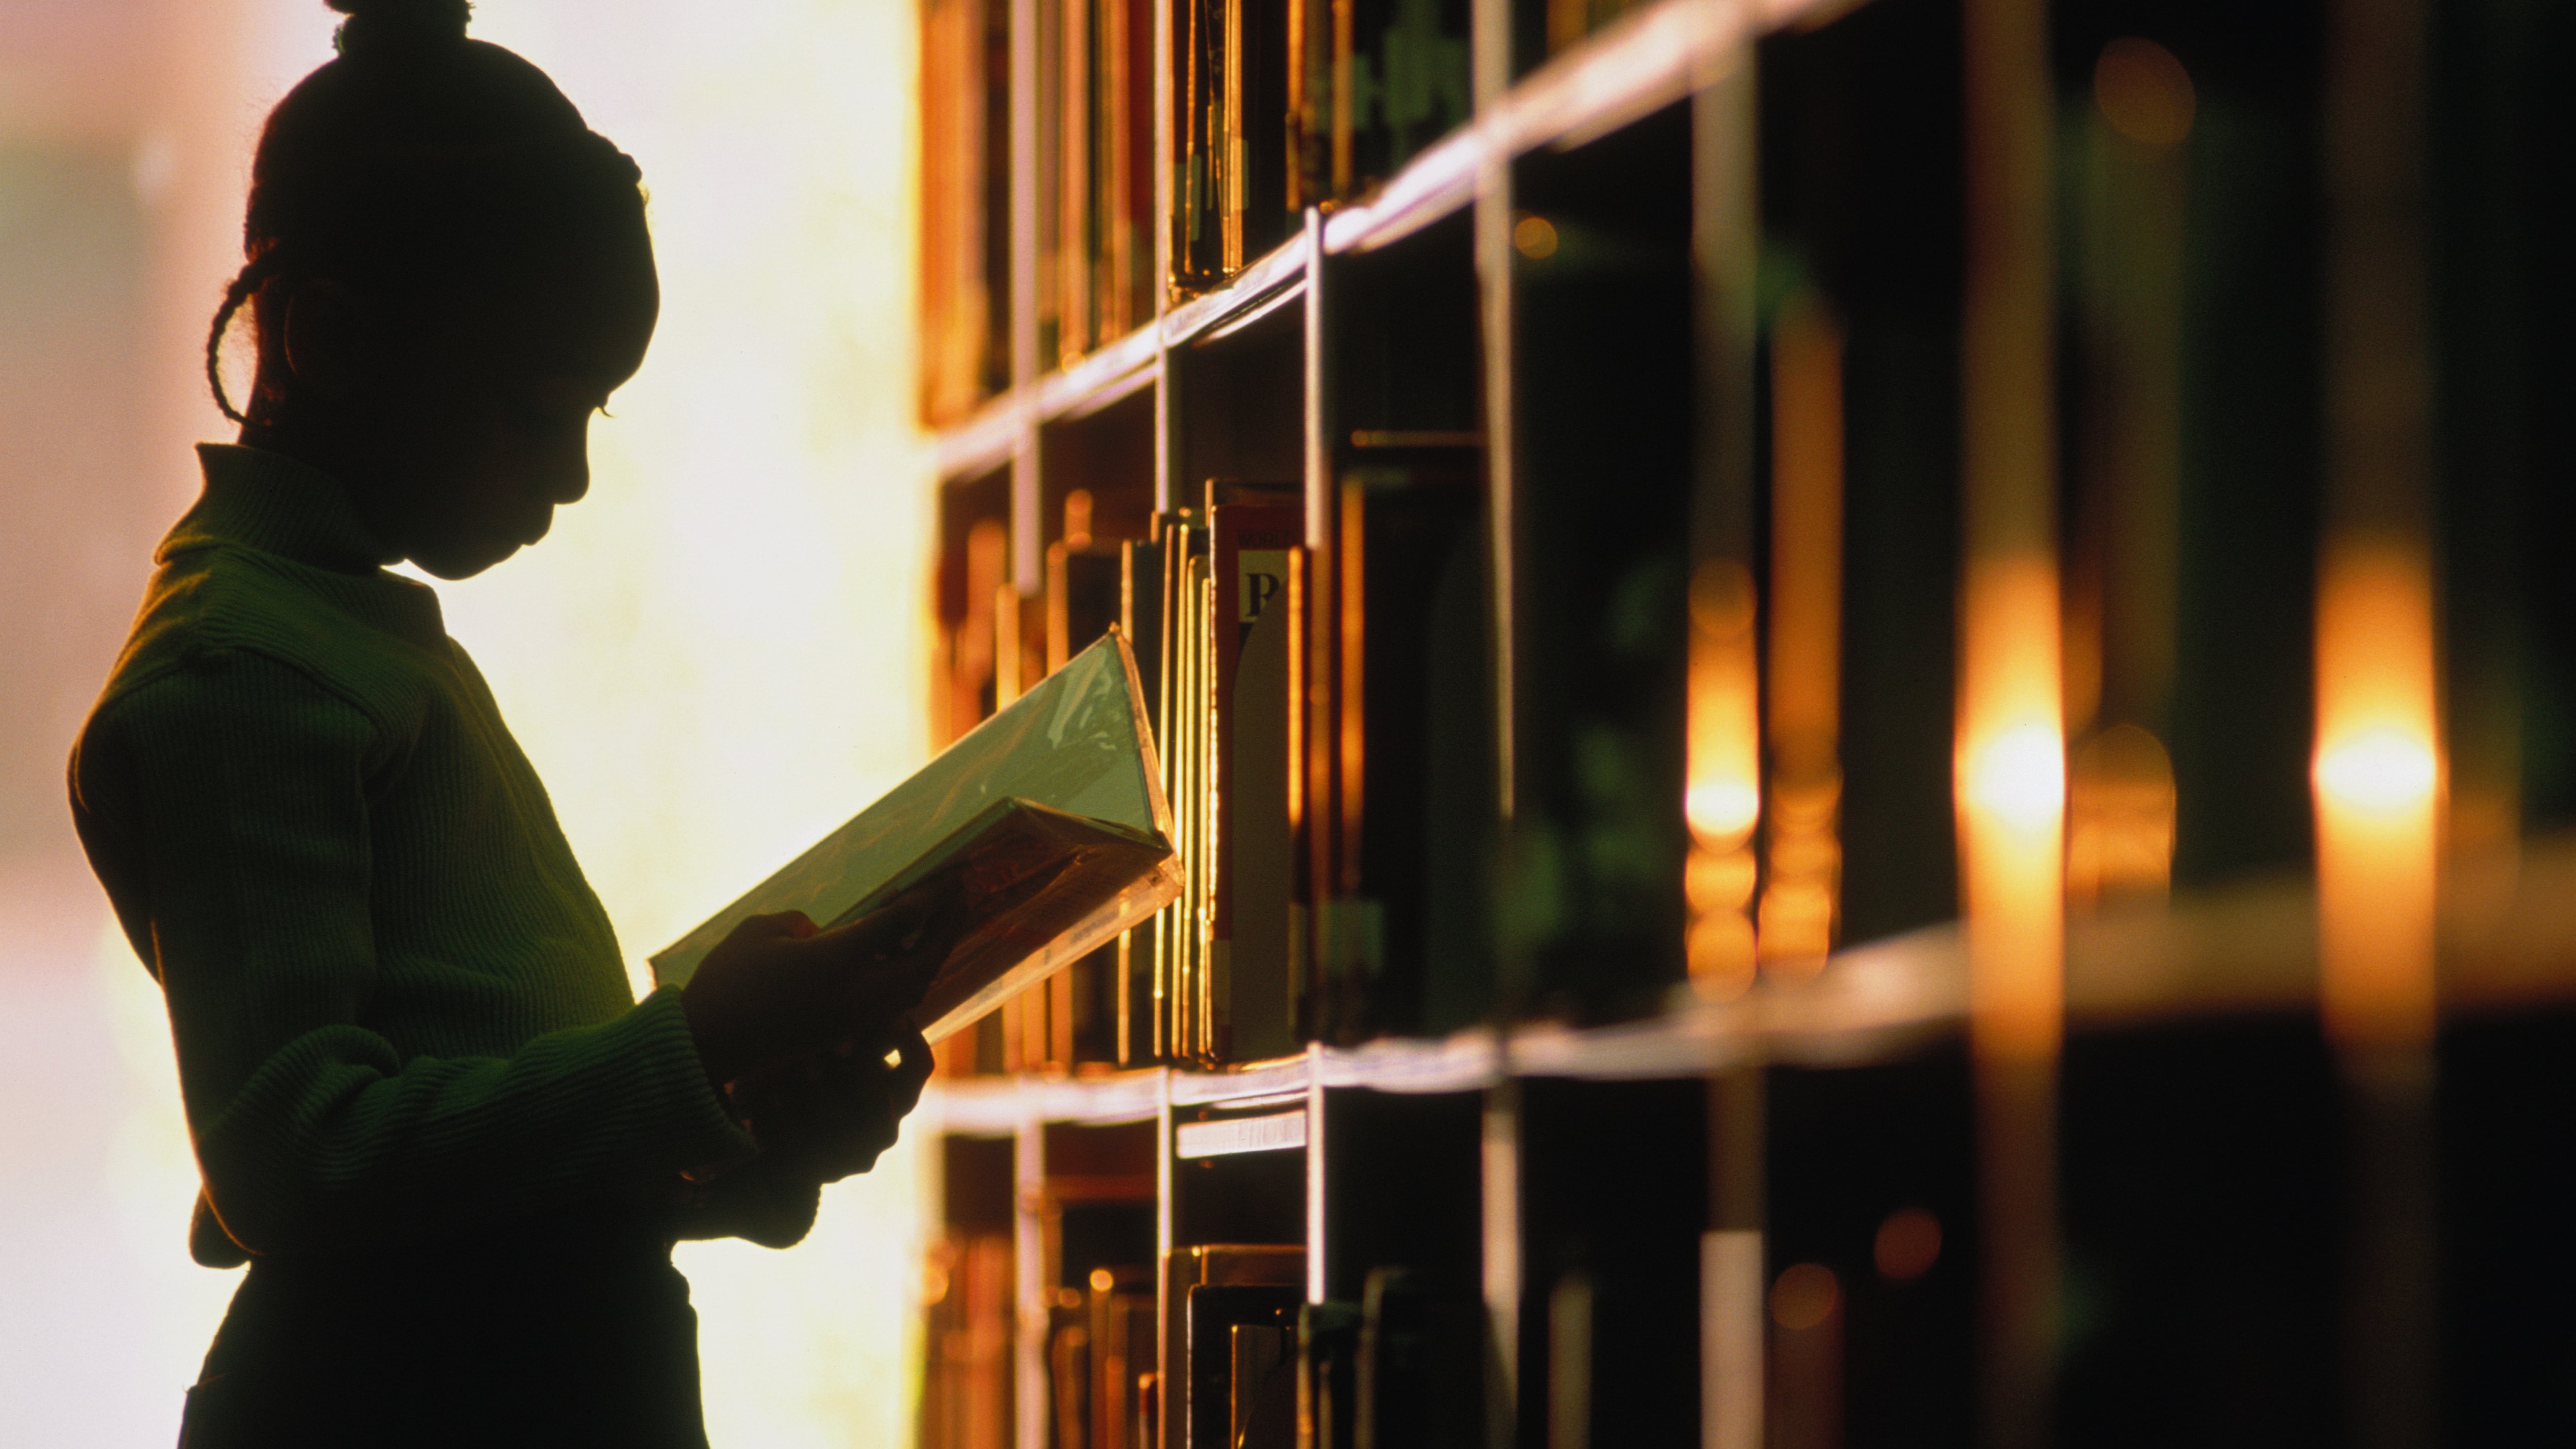 Girl (6-8) looking at book in library, silhouette